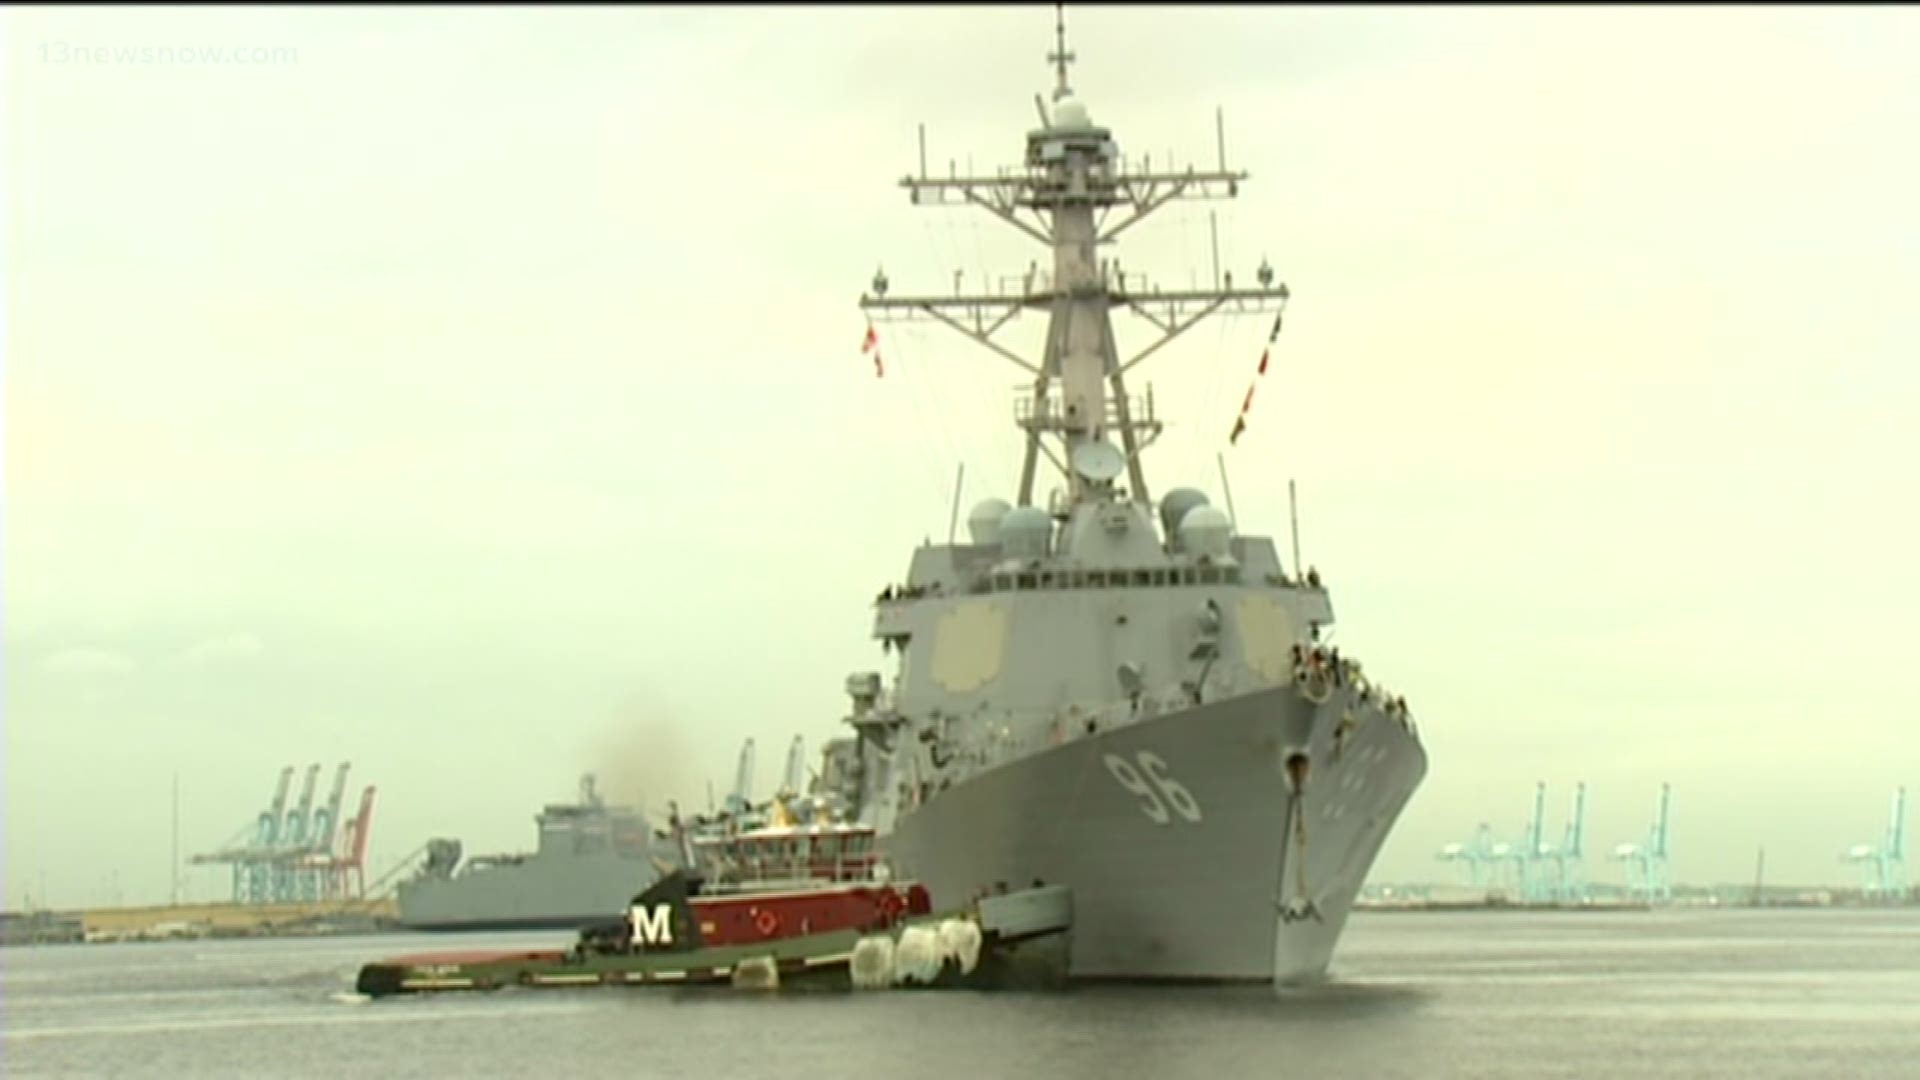 A report says the Navy has decided to cancel plans to do service life extensions on DDG's.